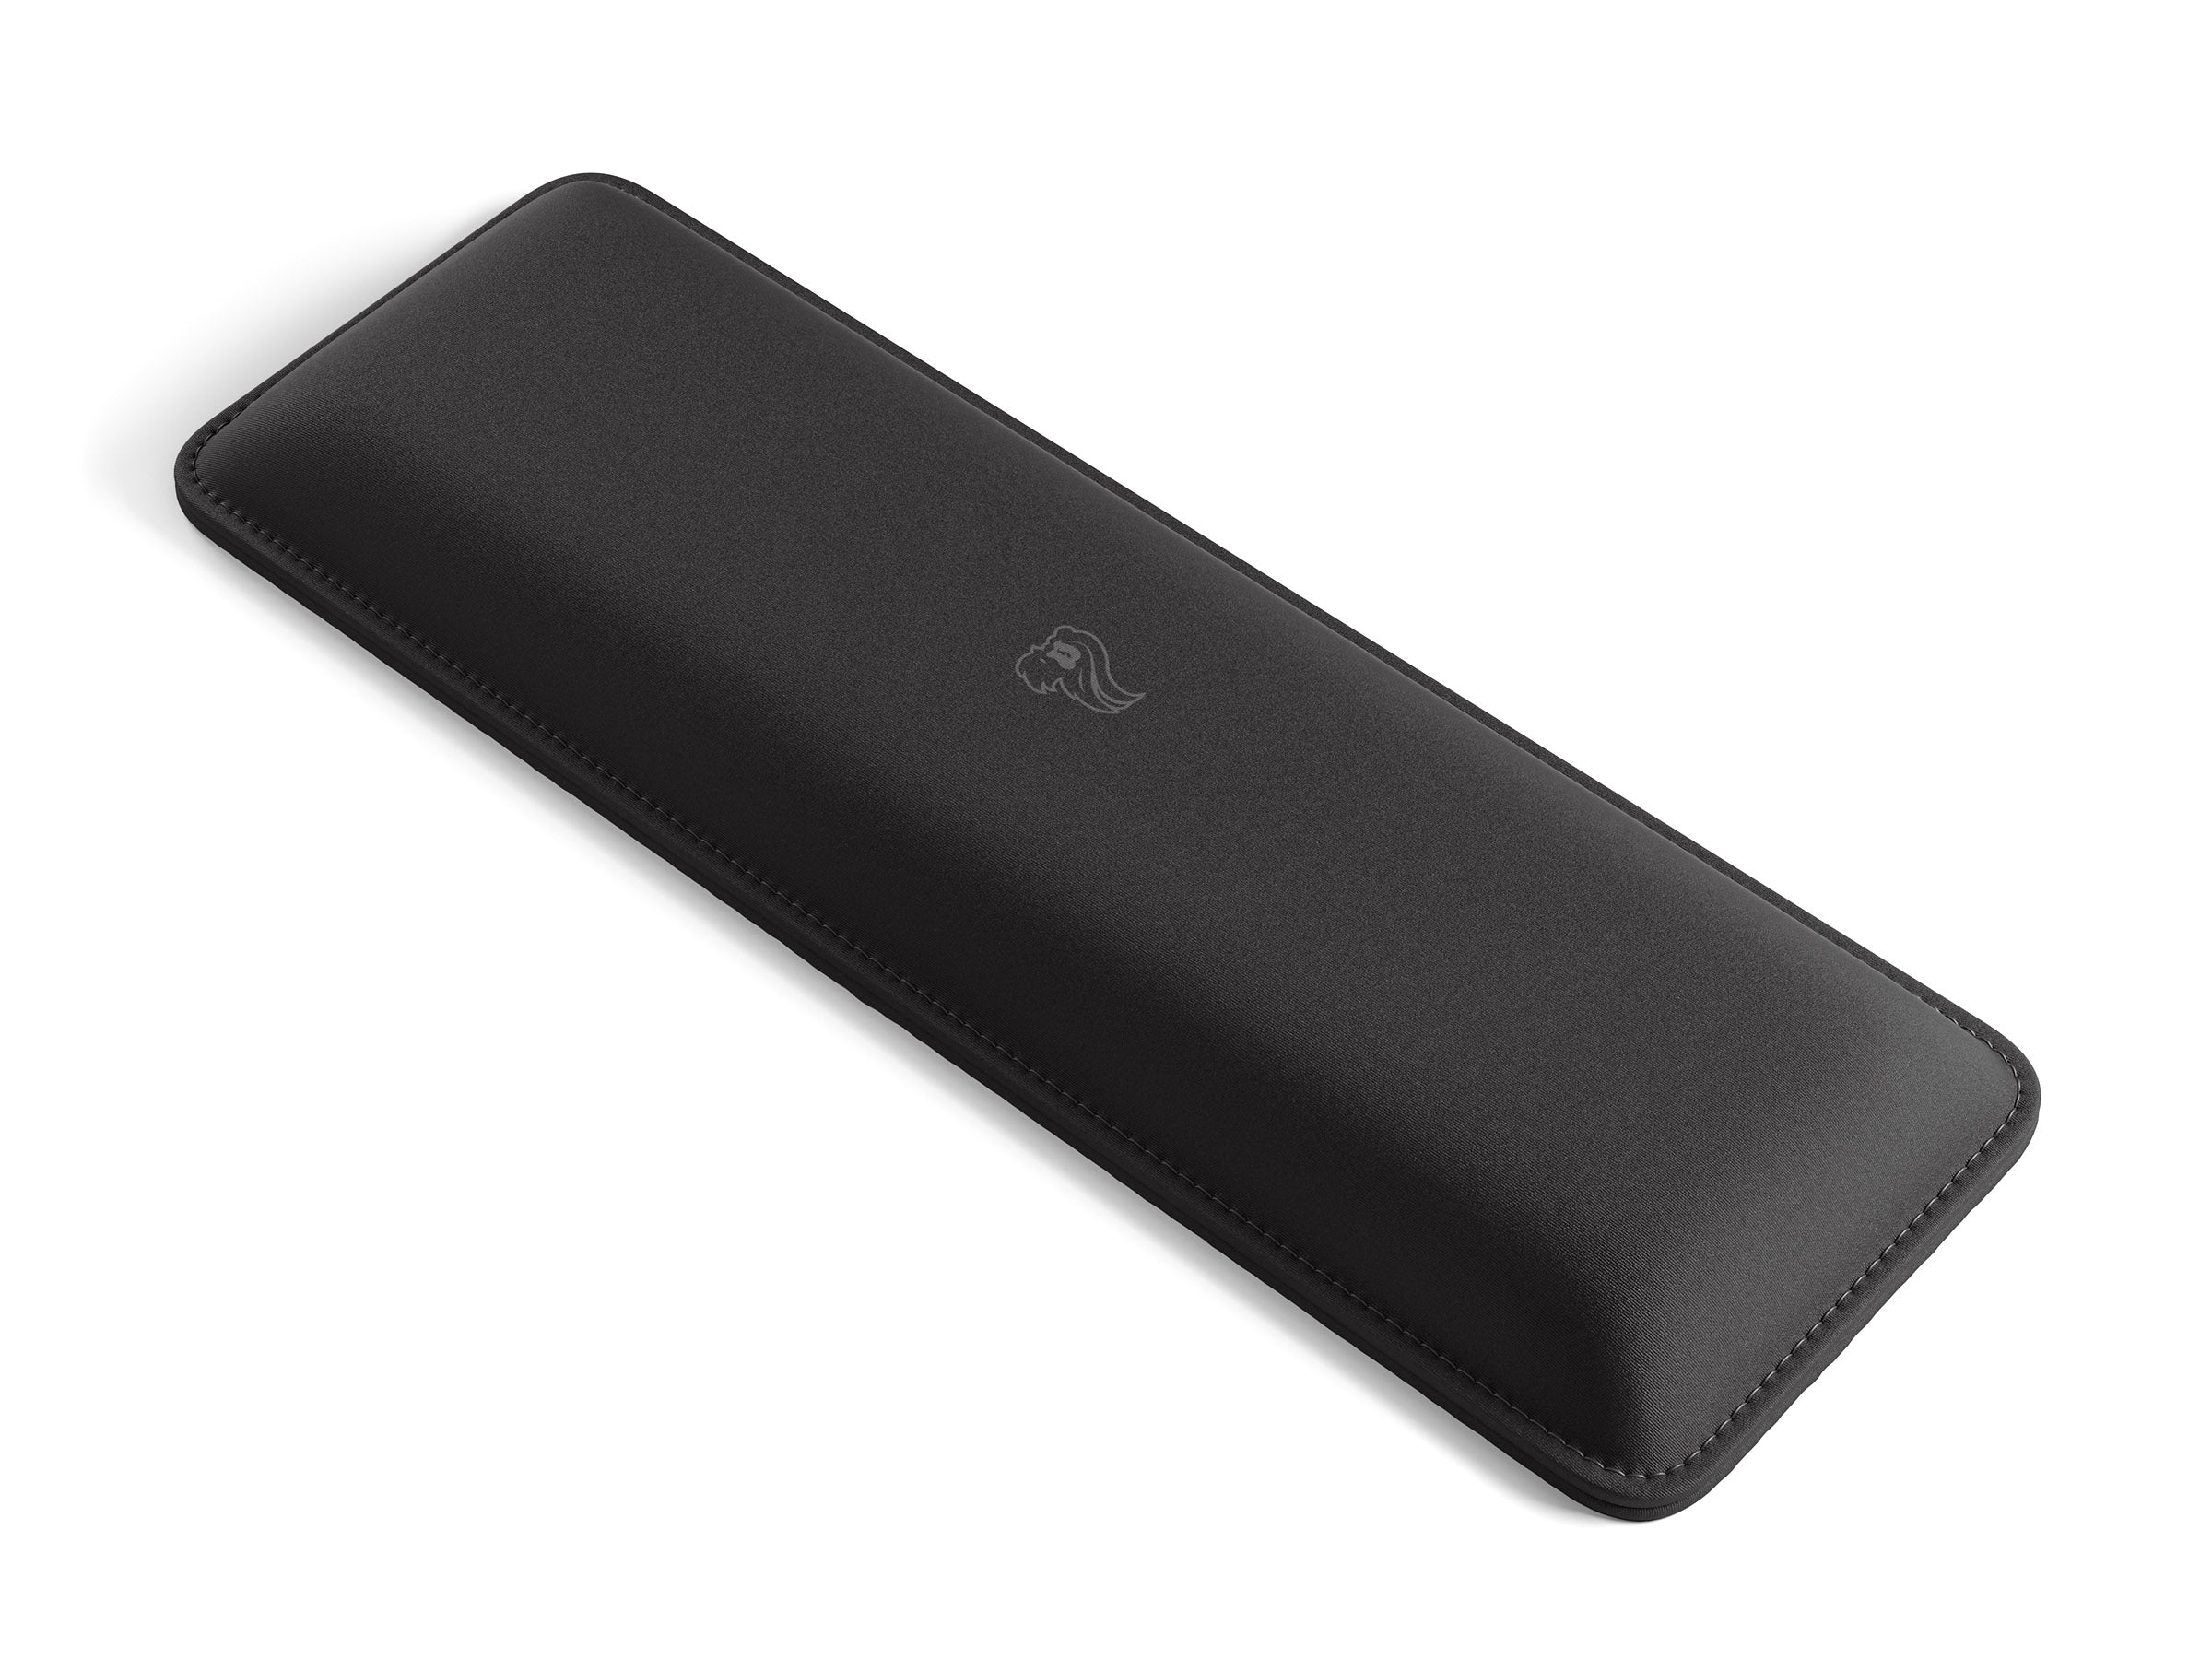 Glorious PC Compact Stealth Padded Wrist Rest Black MKMO5CM9N1 |0|